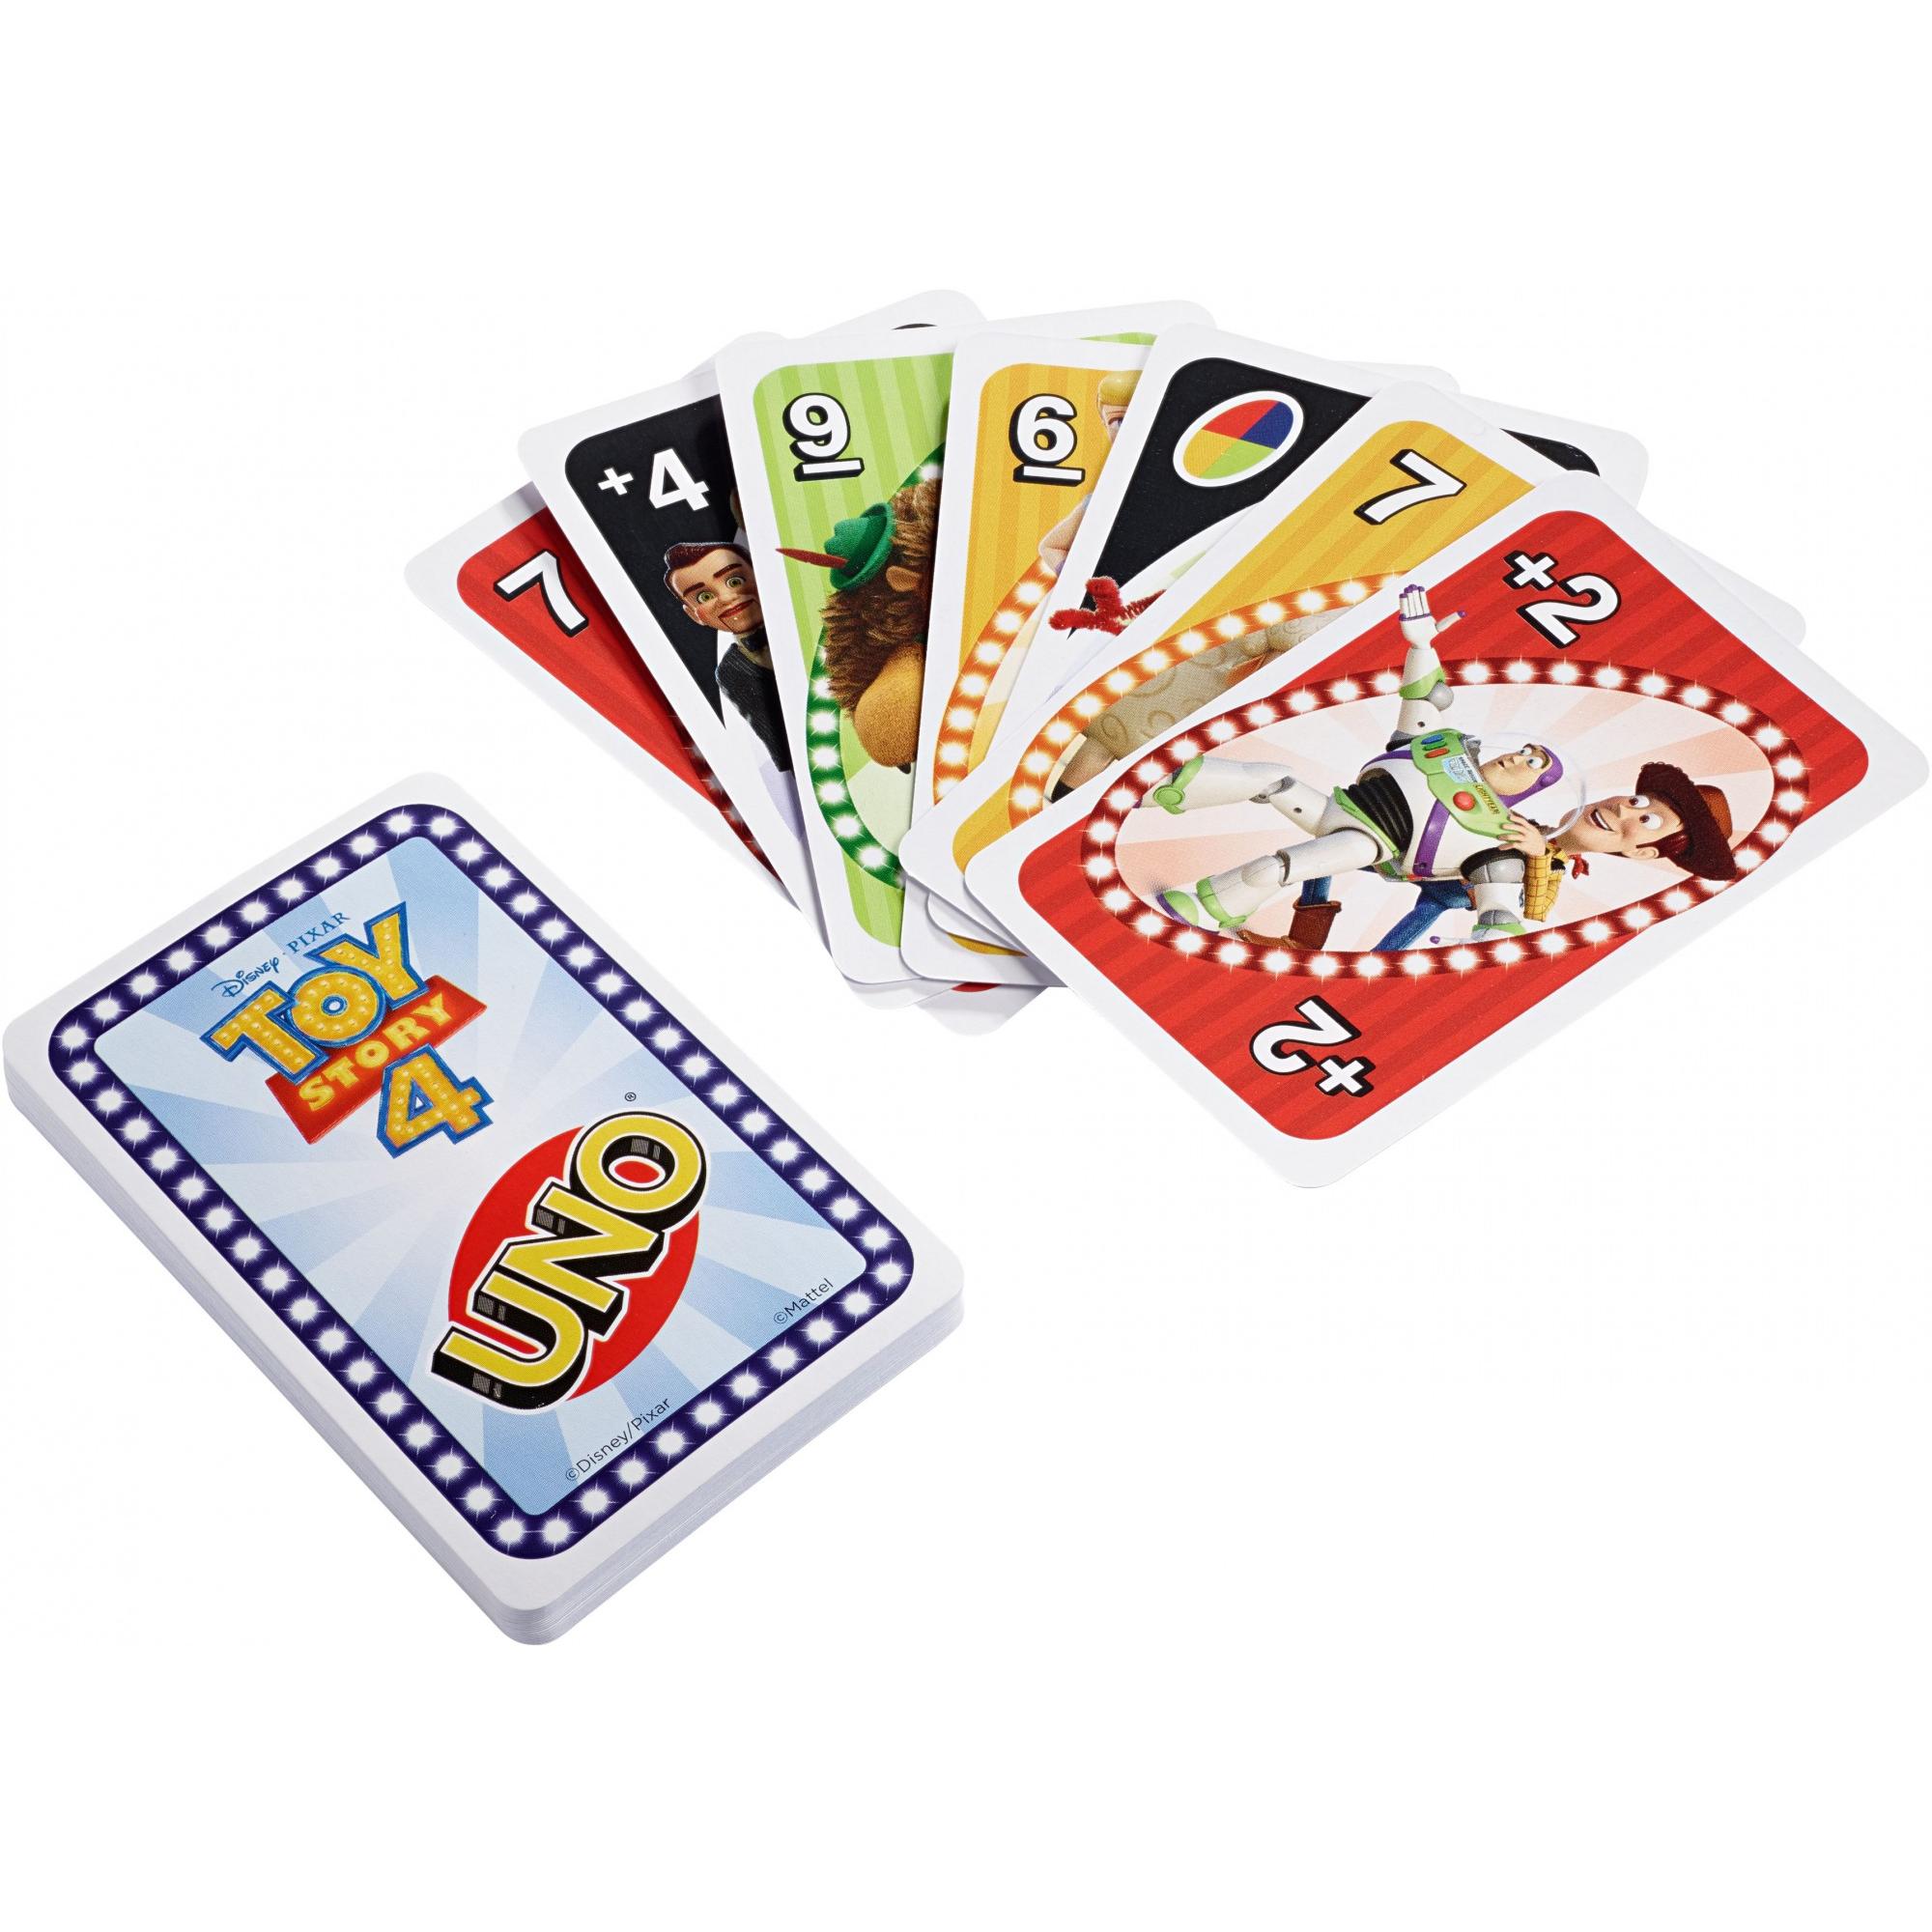 UNO Disney Pixar Toy Story Themed Card Game for 2-10 Players Ages 7Y+ - image 2 of 2